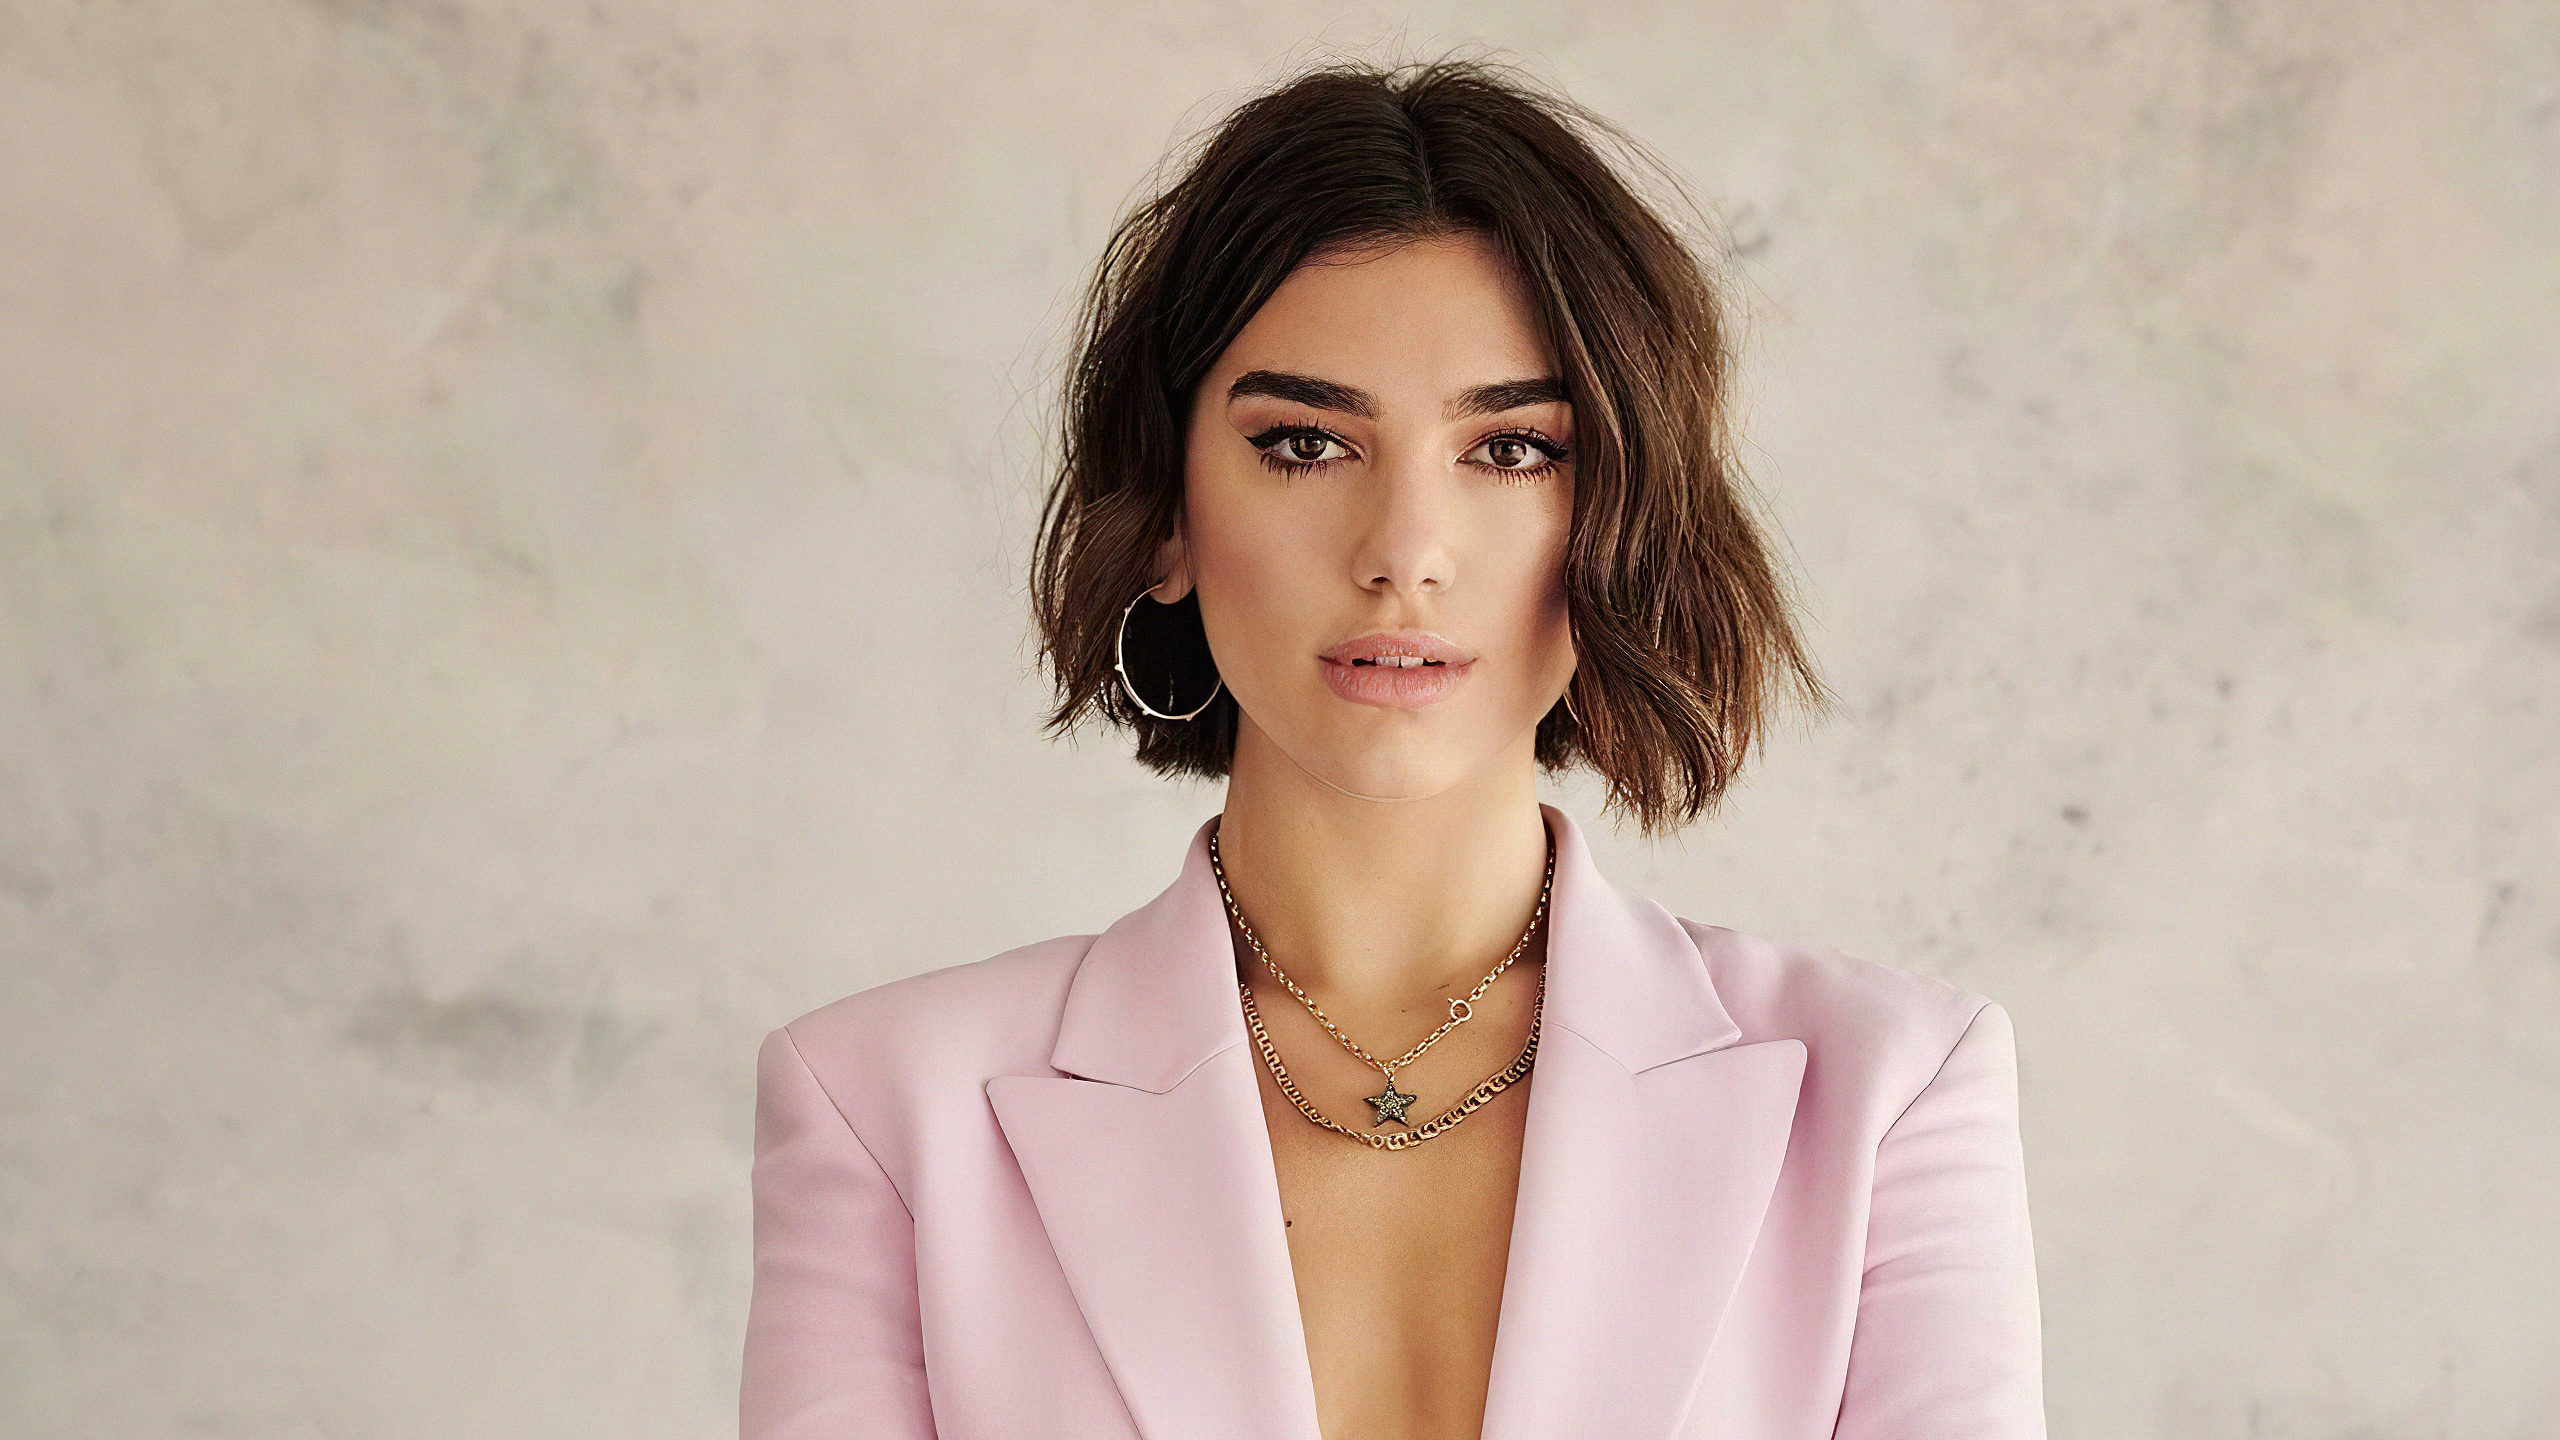 Dua lipa singer hd celebrities k wallpapers images backgrounds photos and pictures